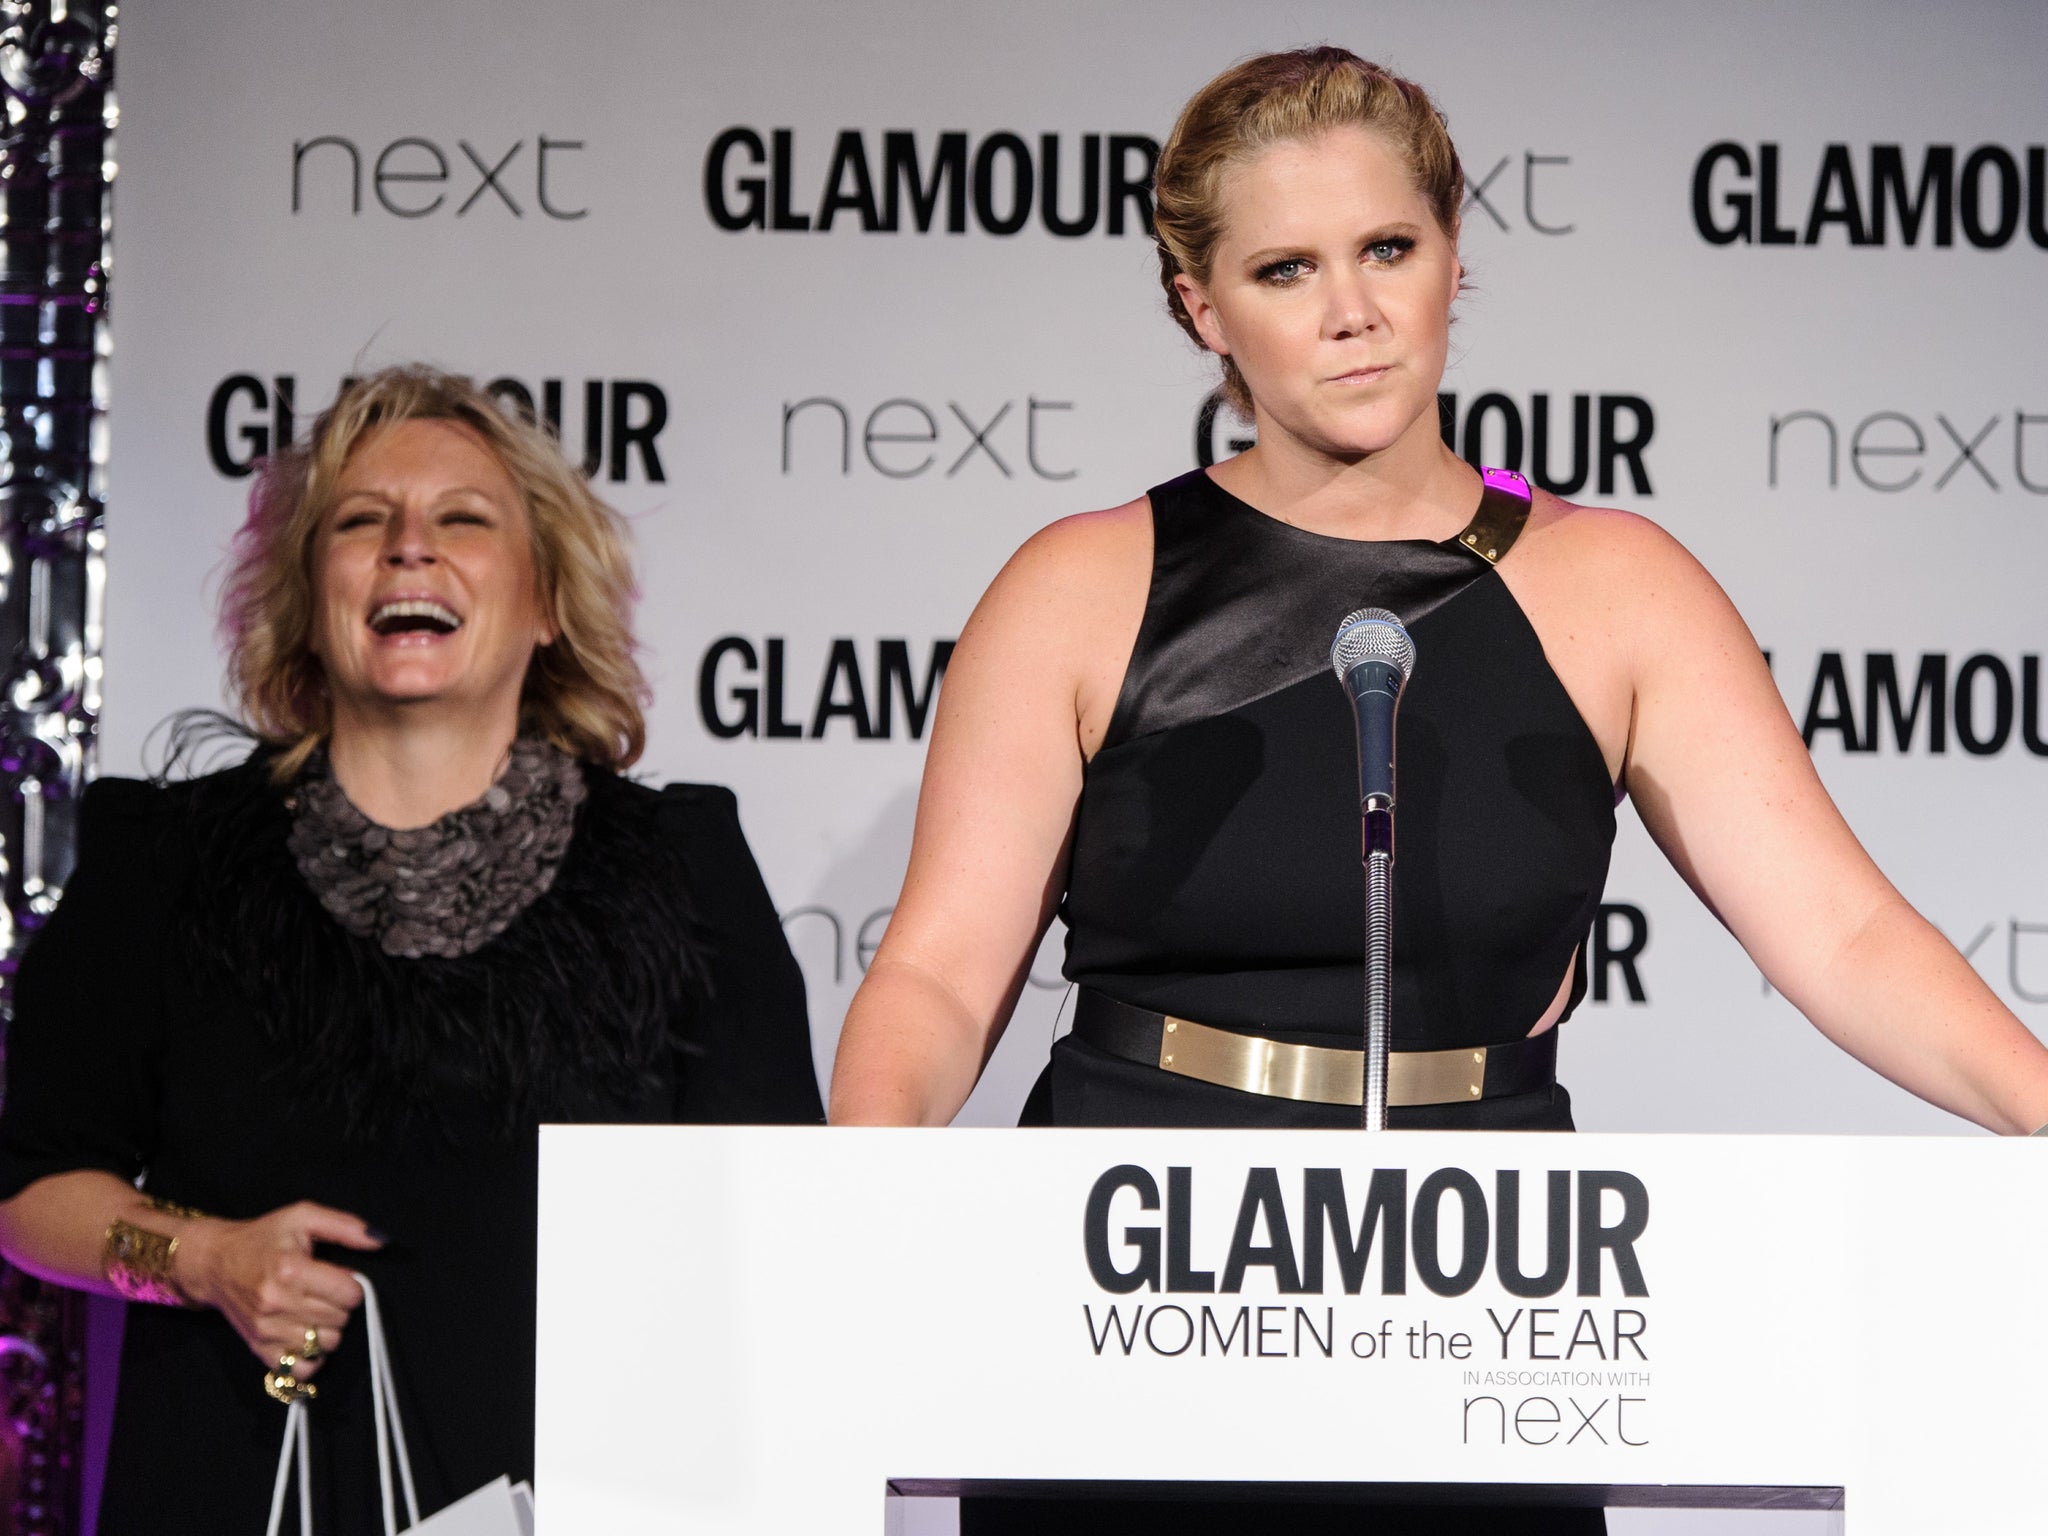 Amy Schumer brought the house down at the Glamour Awards, and made Jennifer Saunders laugh too